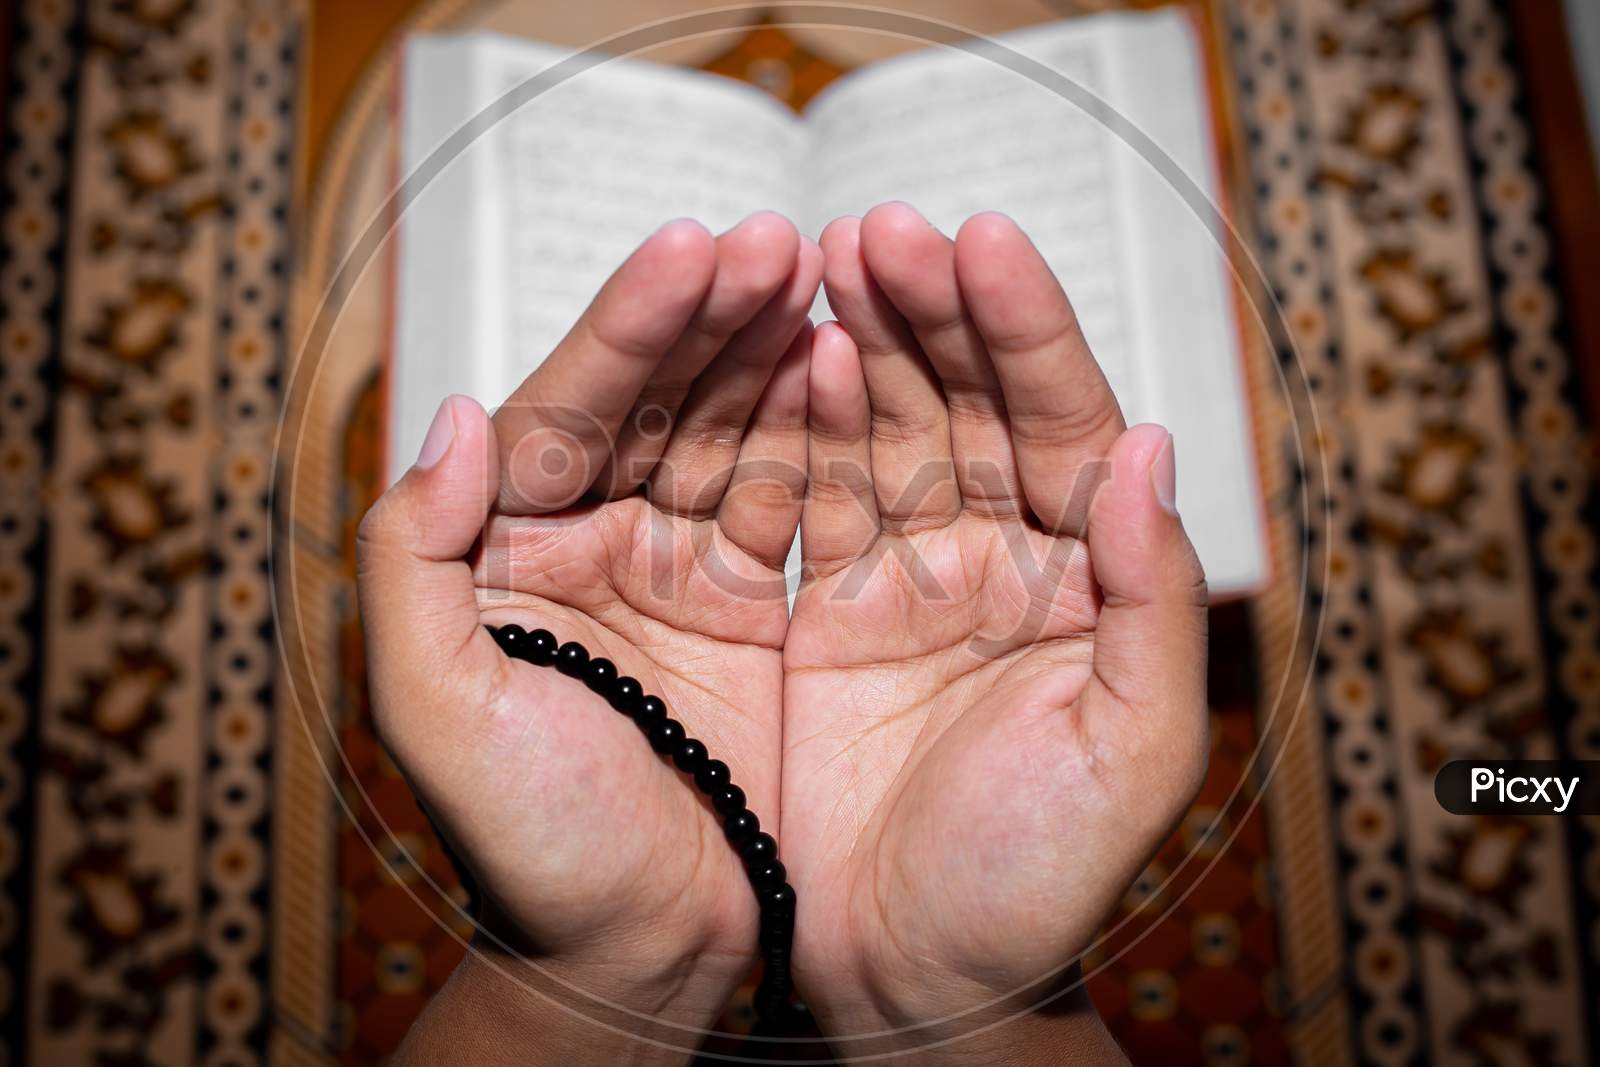 Young Muslim Woman Praying With Tasbeeh. The Holy Quran Is The Background, Indoors. Focus On Hands.